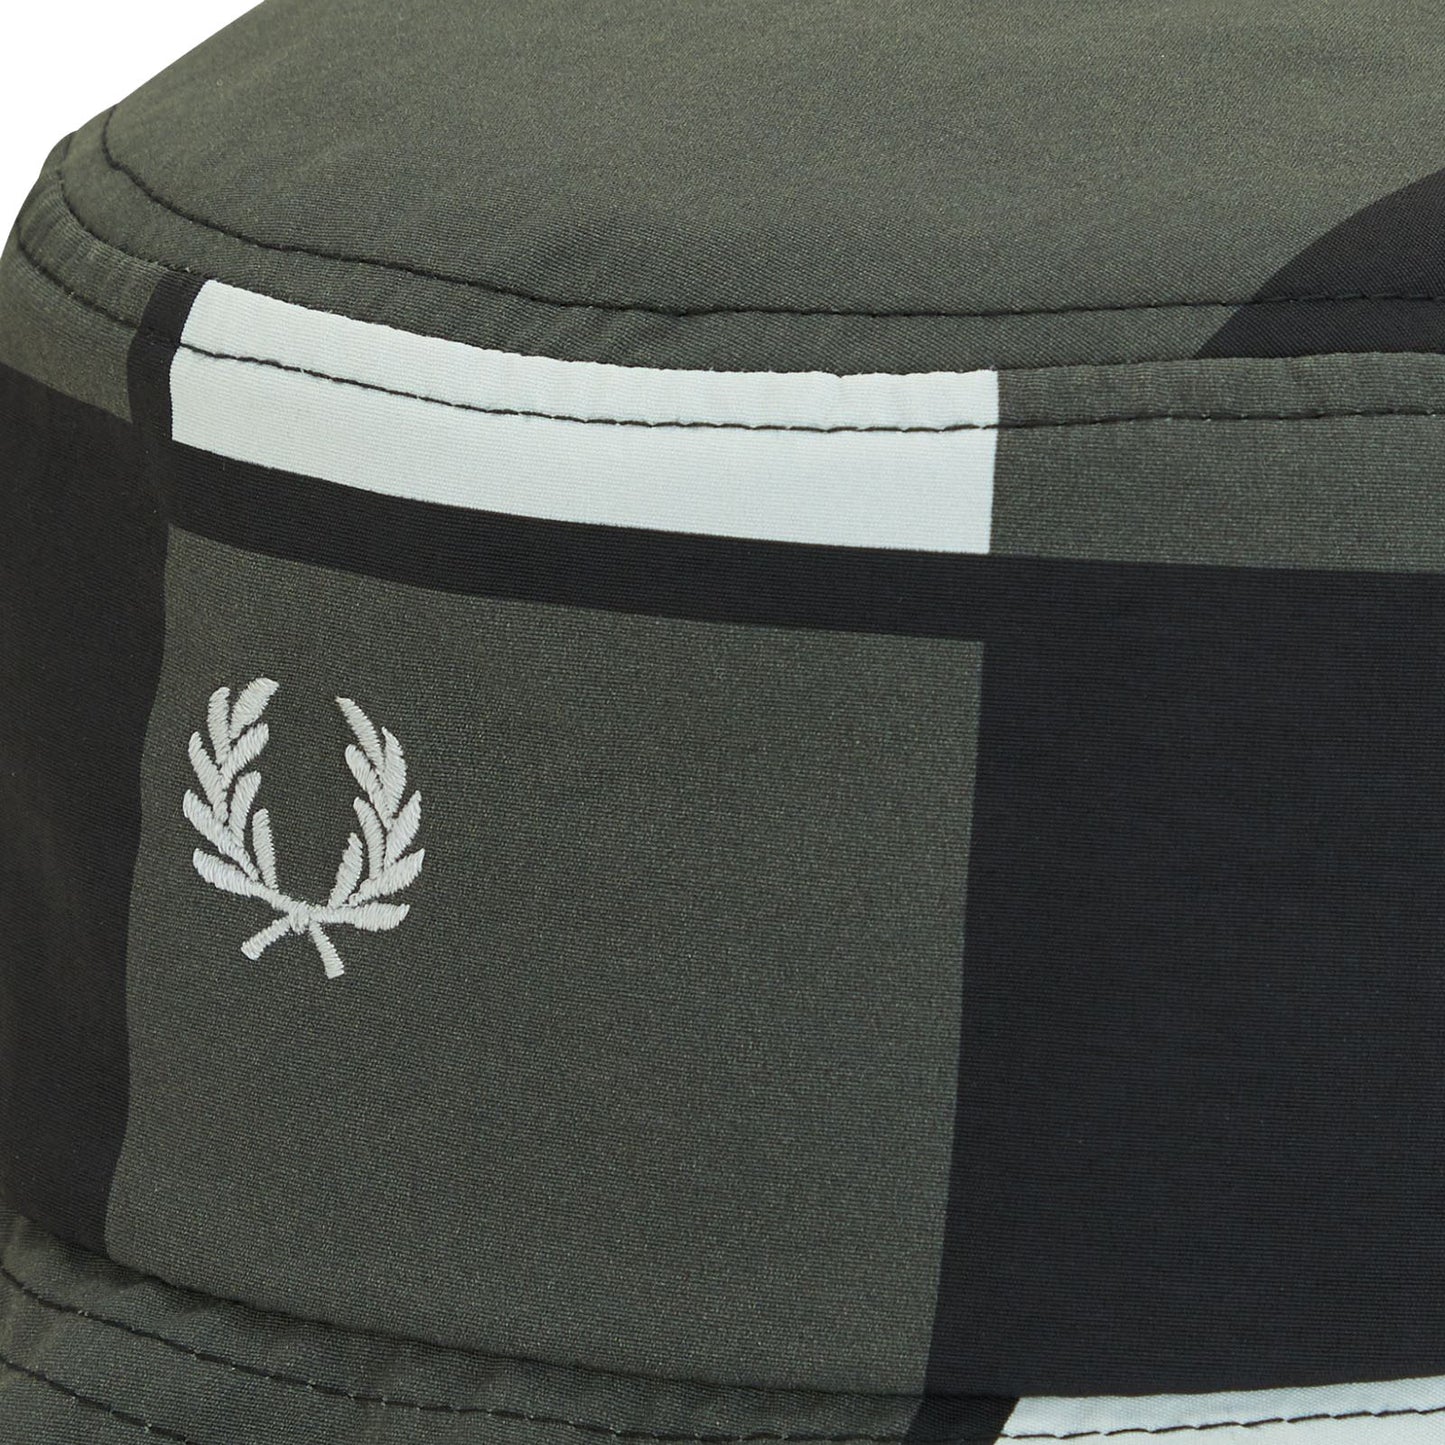 Fred Perry Pixel Print Bucket Hat